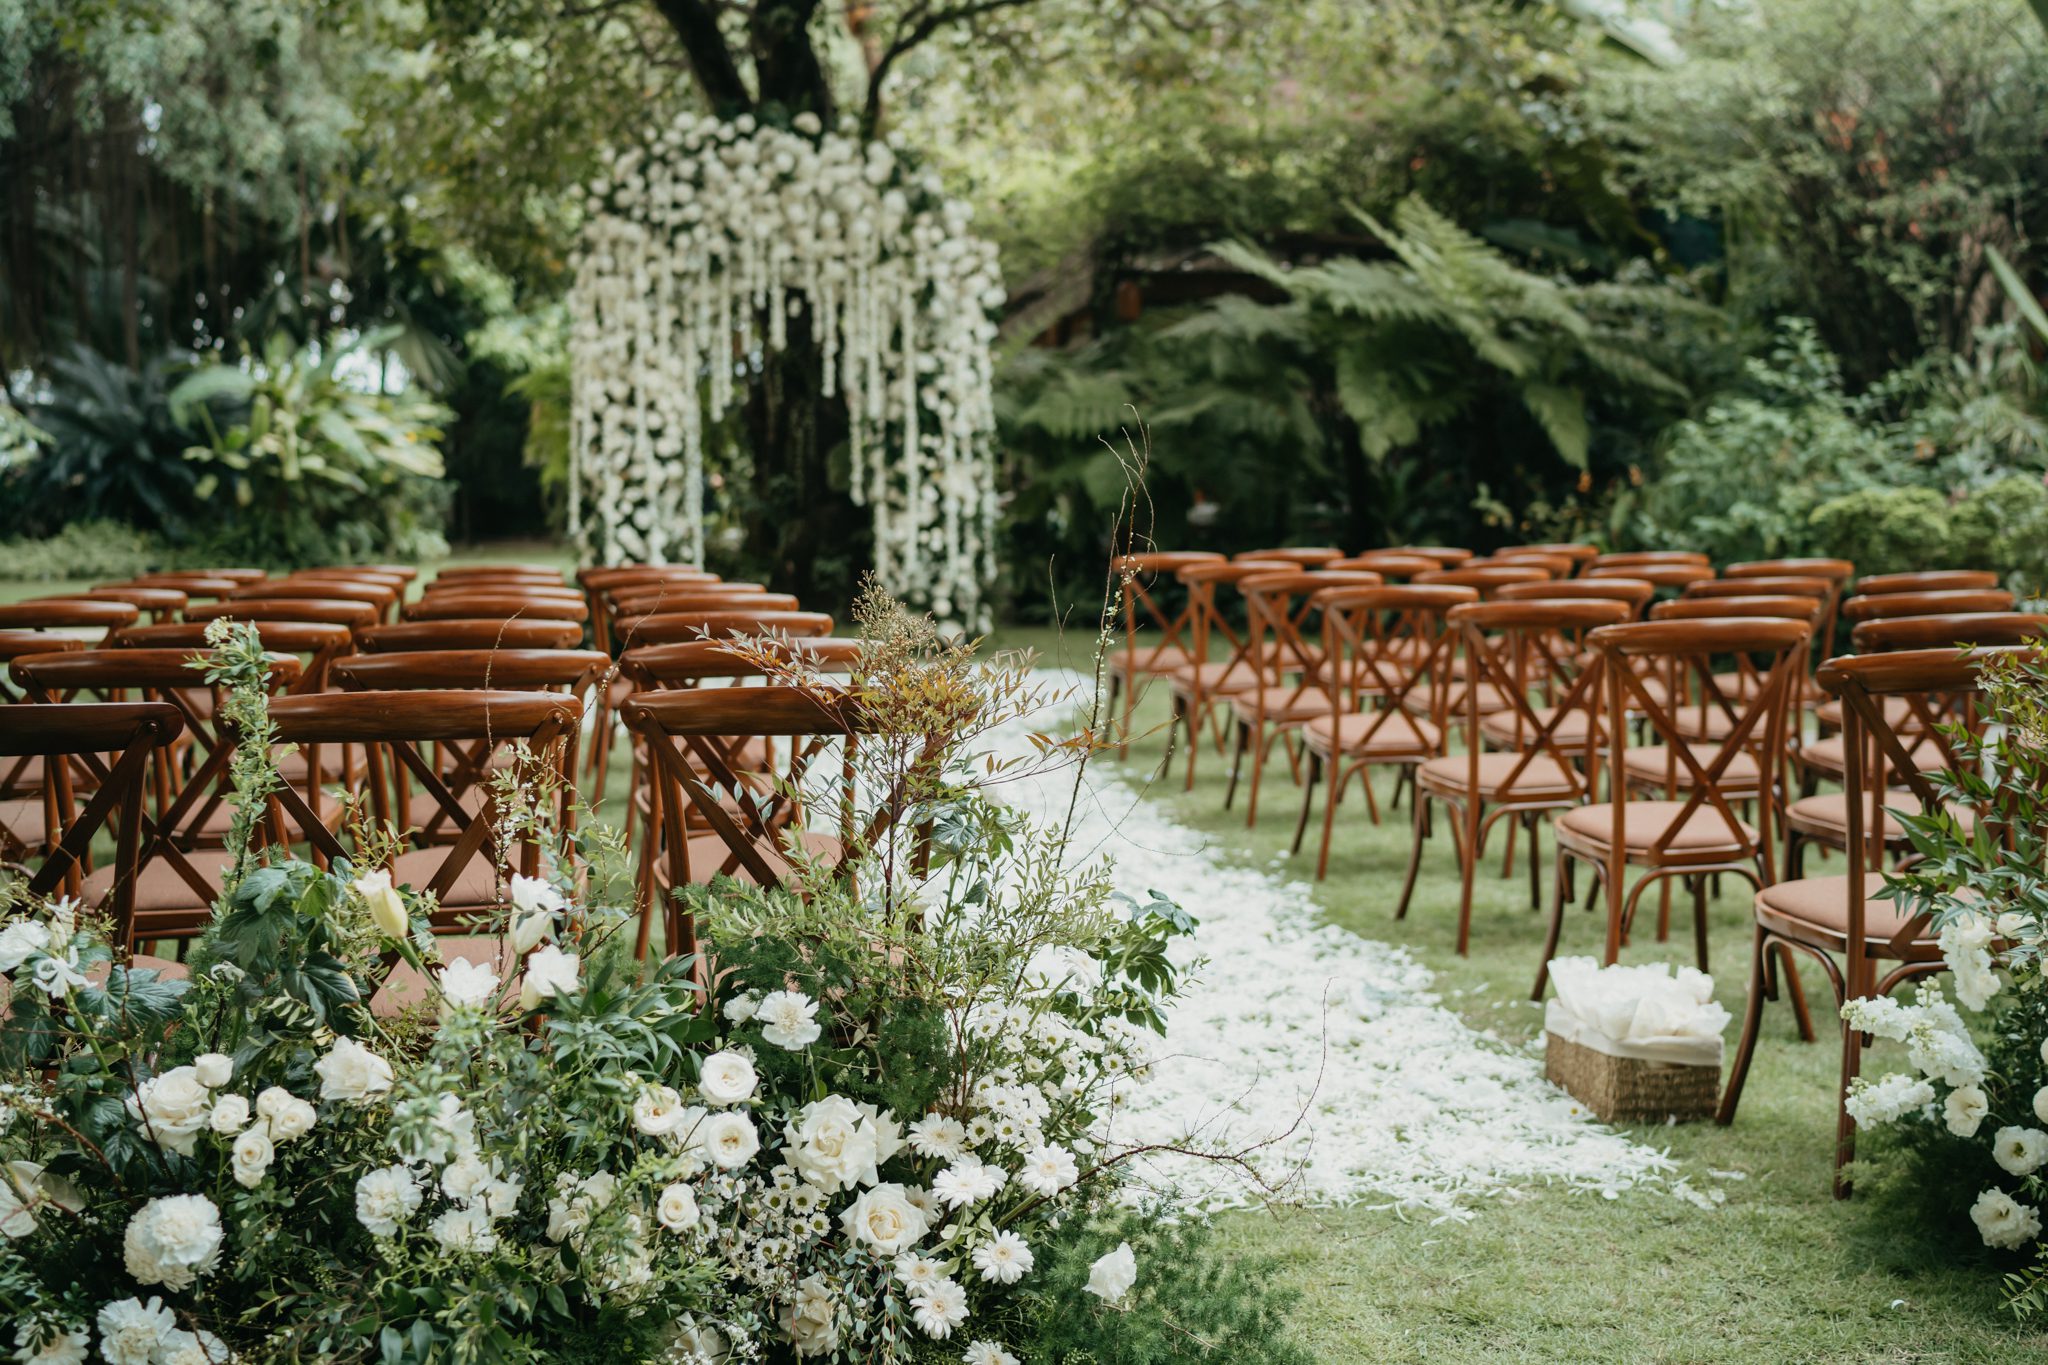 Saigon intimate wedding at An Lam Retreat 06913 - The Planners